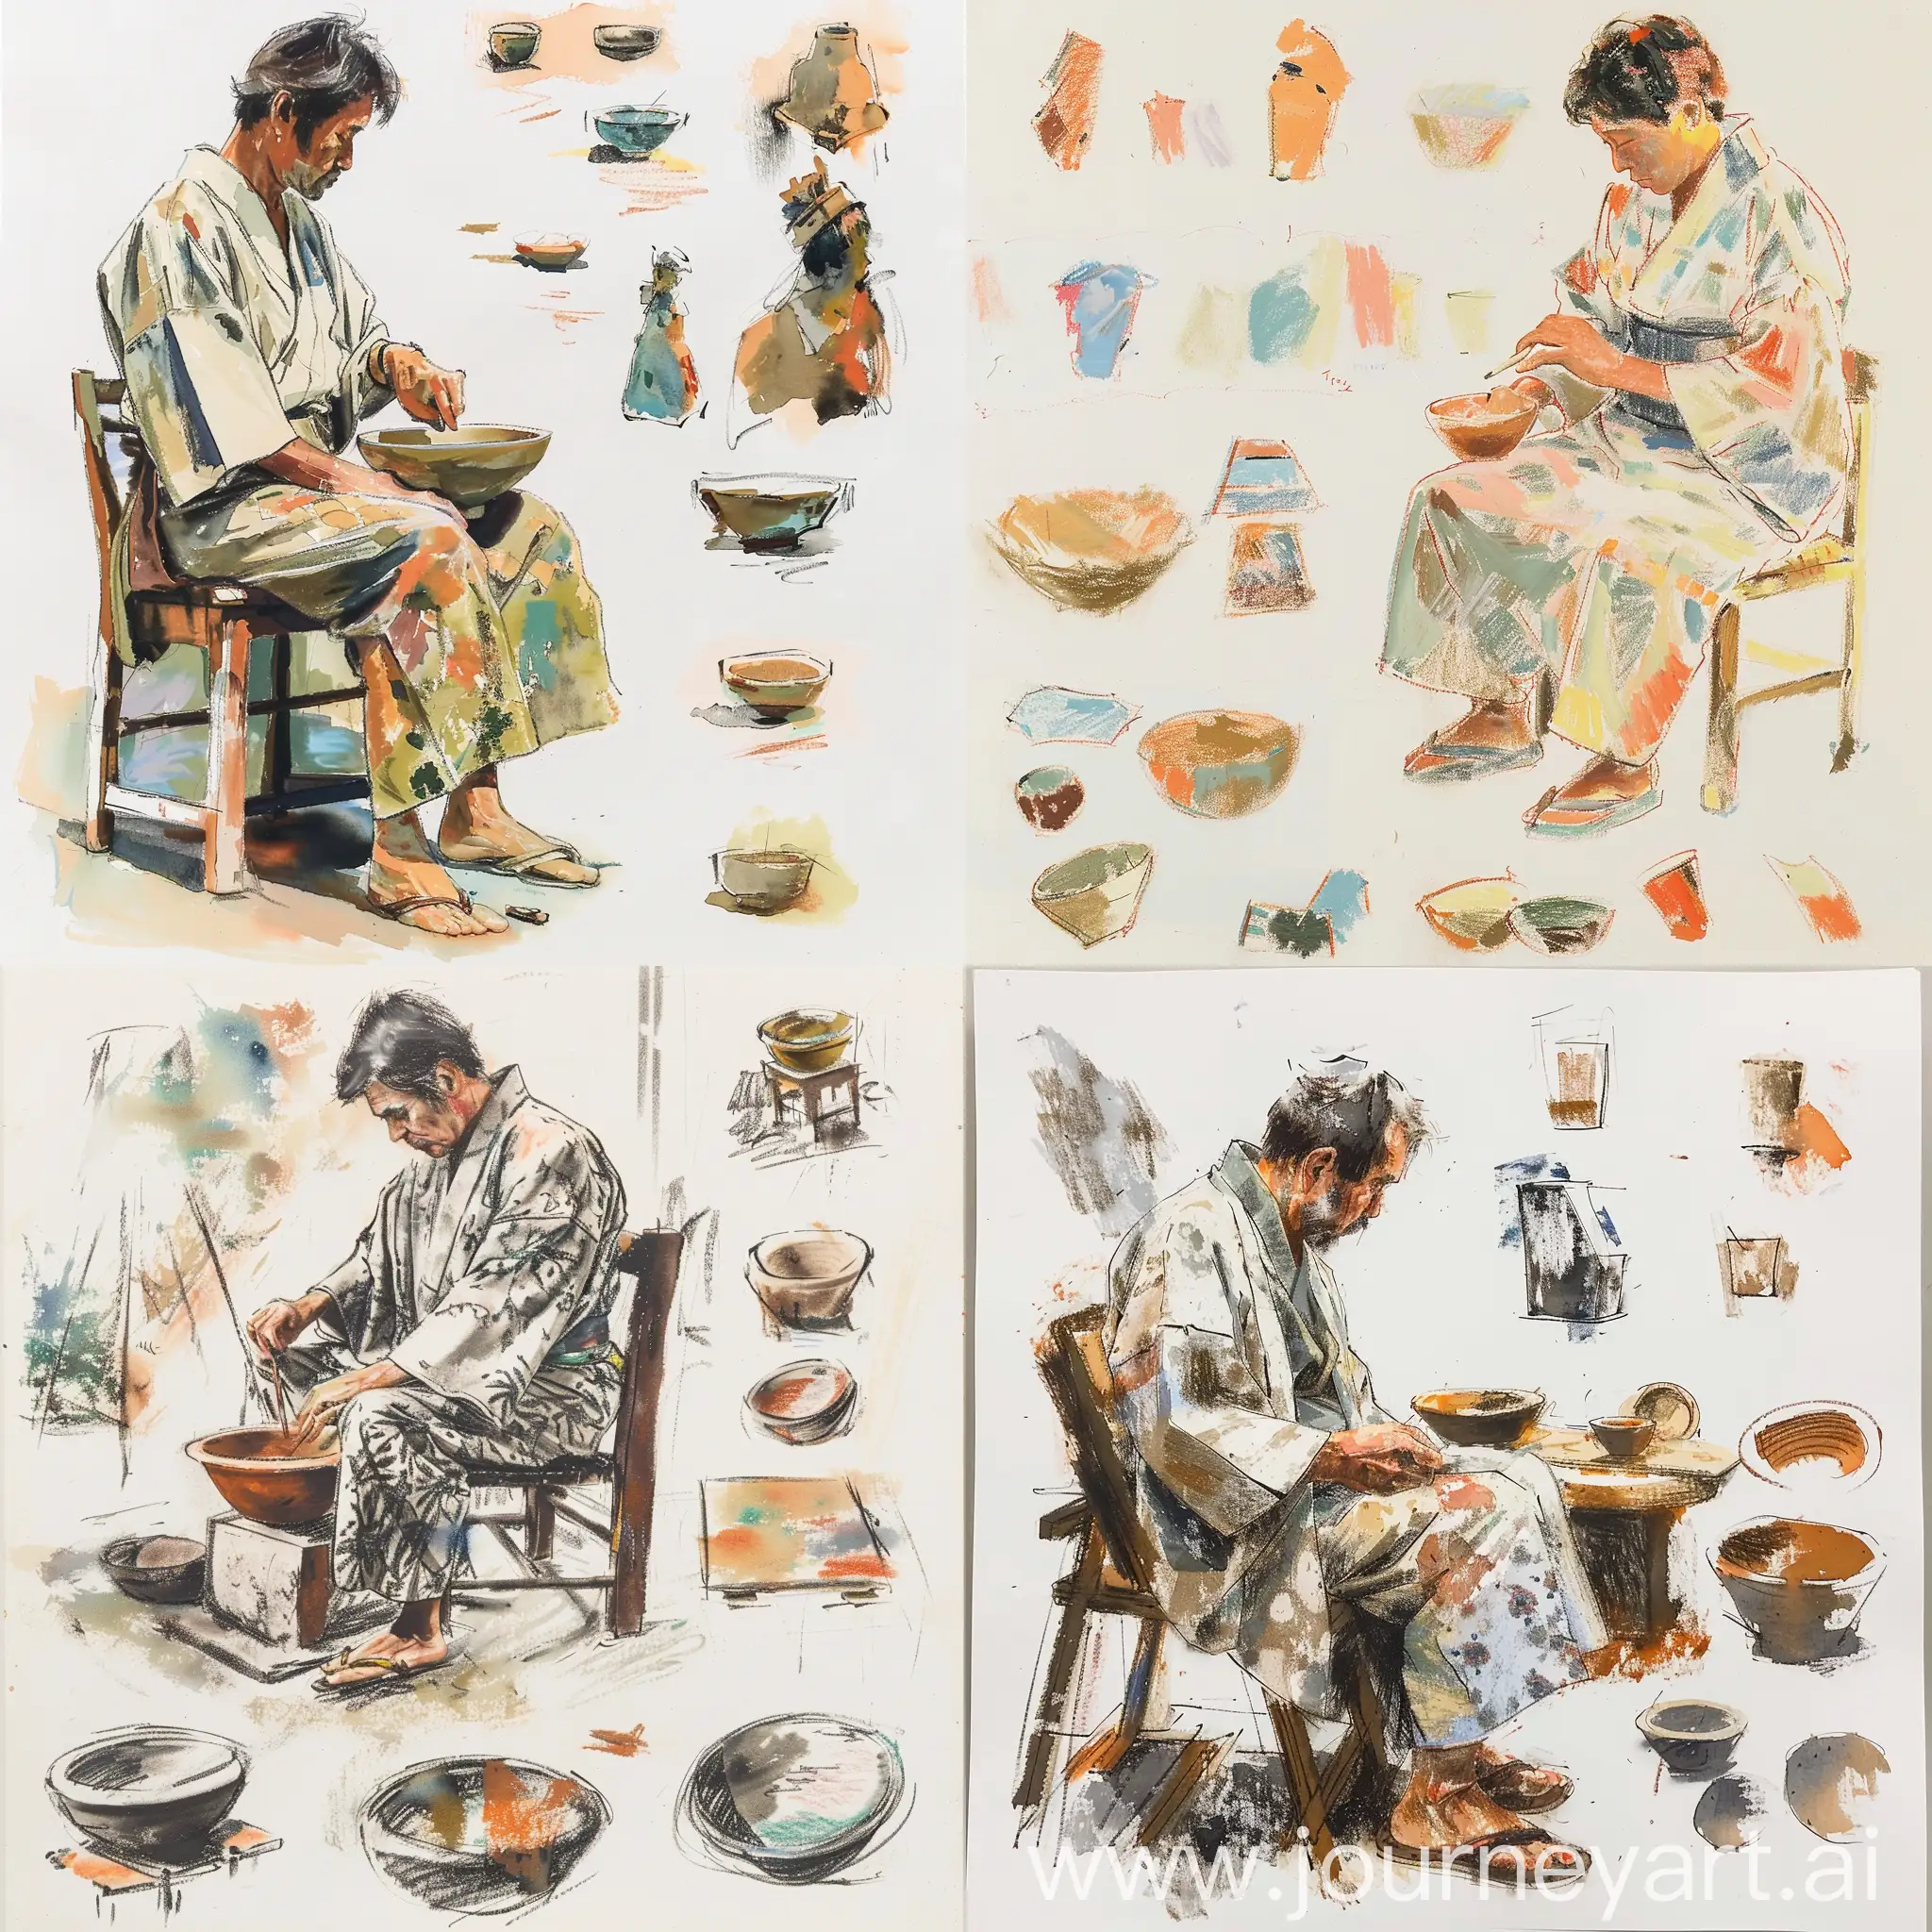 Soft pastel bowl making on white background Artist type sketch depicting a middle aged distressed artisan potter ((Japanese man)) (closeup), on kimono, sitting on a chair, hard at work making a bowl. (Fire pit) kiln and bowl work style pottery shapes are arranged. Various oil and watercolor paintings in Matisse style, peaceful scenes of creative expression. Simple lines and flat colors, sparse simplicity, Y2K